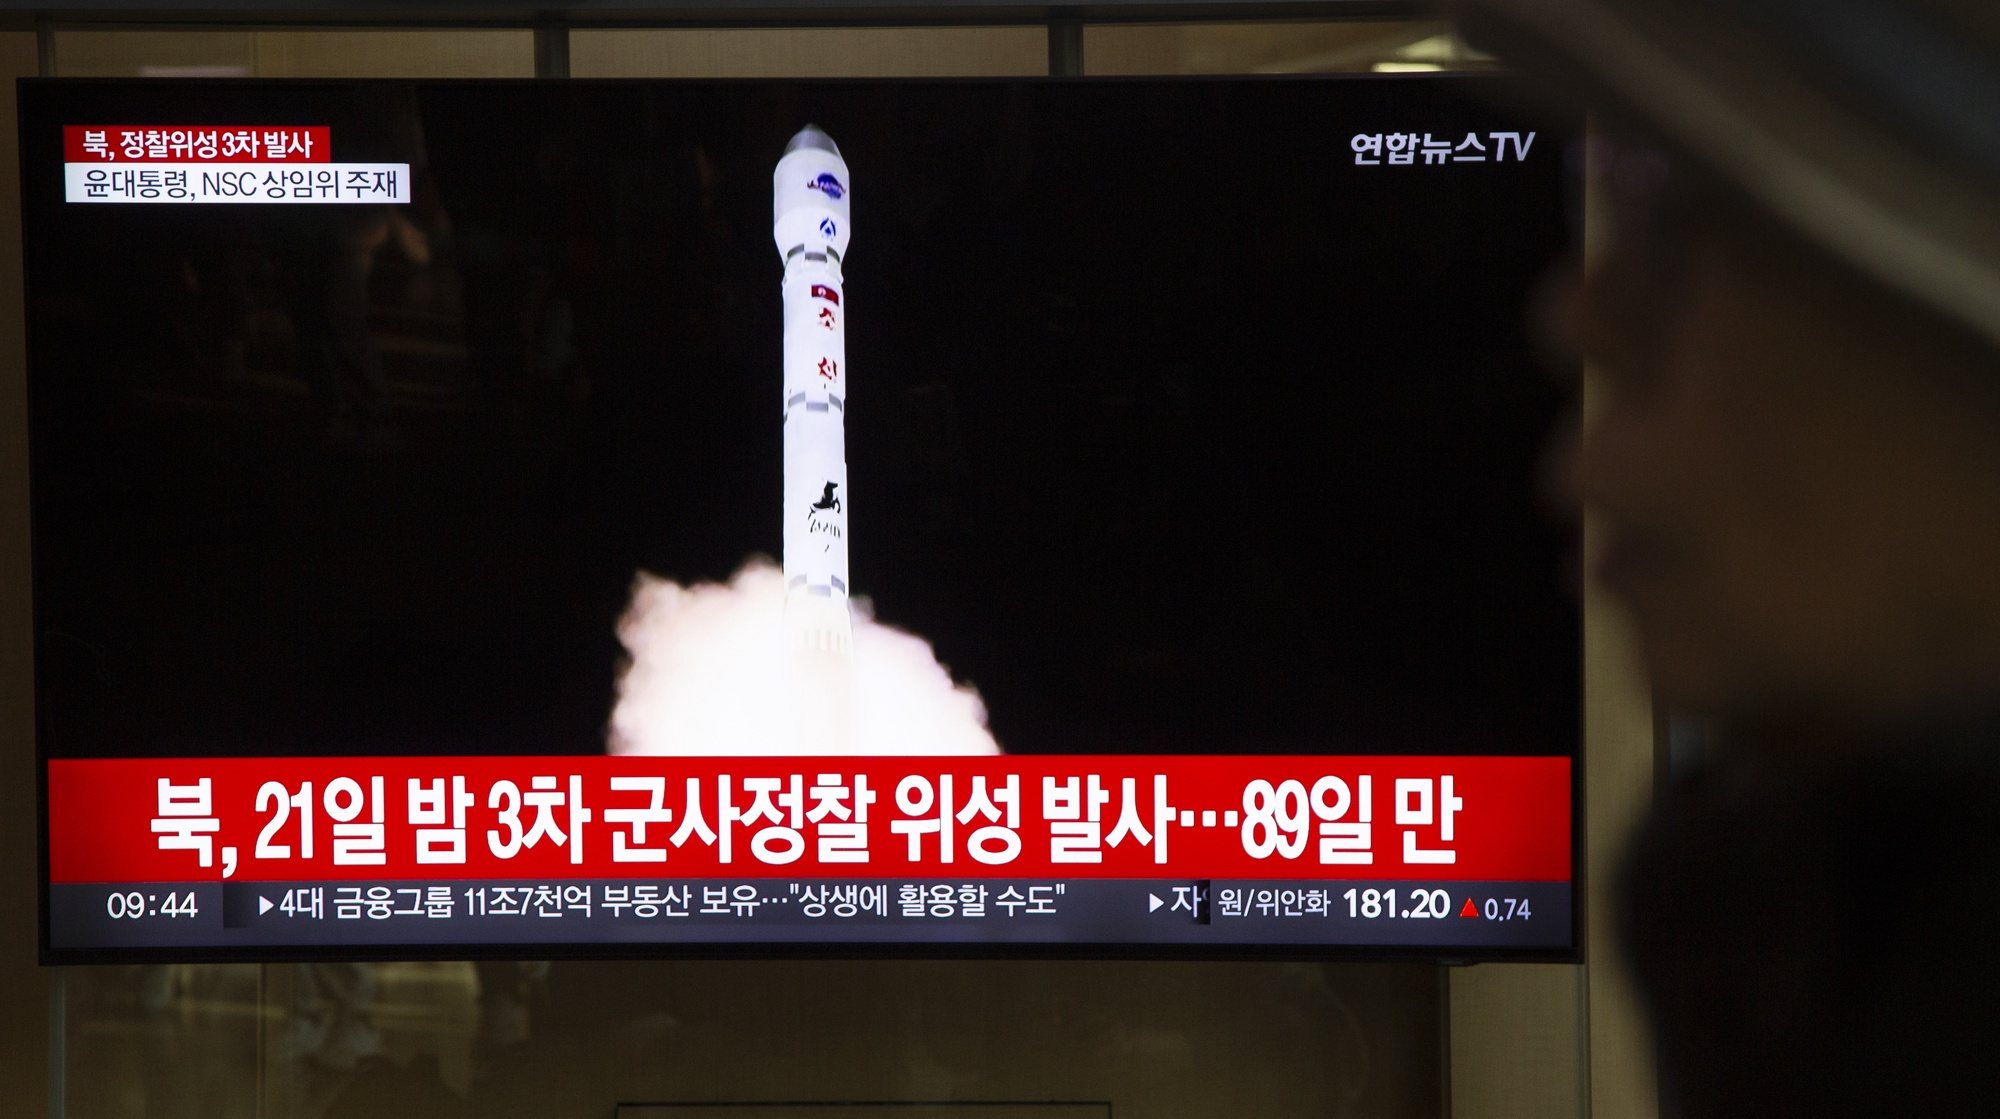 epa10988726 A tv monitor displays daily news at a station in Seoul, South Korea, 22 November 2023. According to South Korea&#039;s Joint Chiefs of Staff (JCS), North Korea launched a new-type carrier rocket &#039;Chollima-1&#039; with the reconnaissance satellite &#039;Malligyong-1&#039; from Sohae Satellite Launching Ground in Cholsan County, on 21 November 2023. According to KCNA, North Korea&#039;s National Aerospace Technology Administration (NATA) successfully launched &#039;Chollima-1&#039; and &#039;accurately put the reconnaissance satellite &#039;Malligyong-1&#039; on its orbit at 22:54:13, 705s after the launch&#039;.  EPA/JEON HEON-KYUN